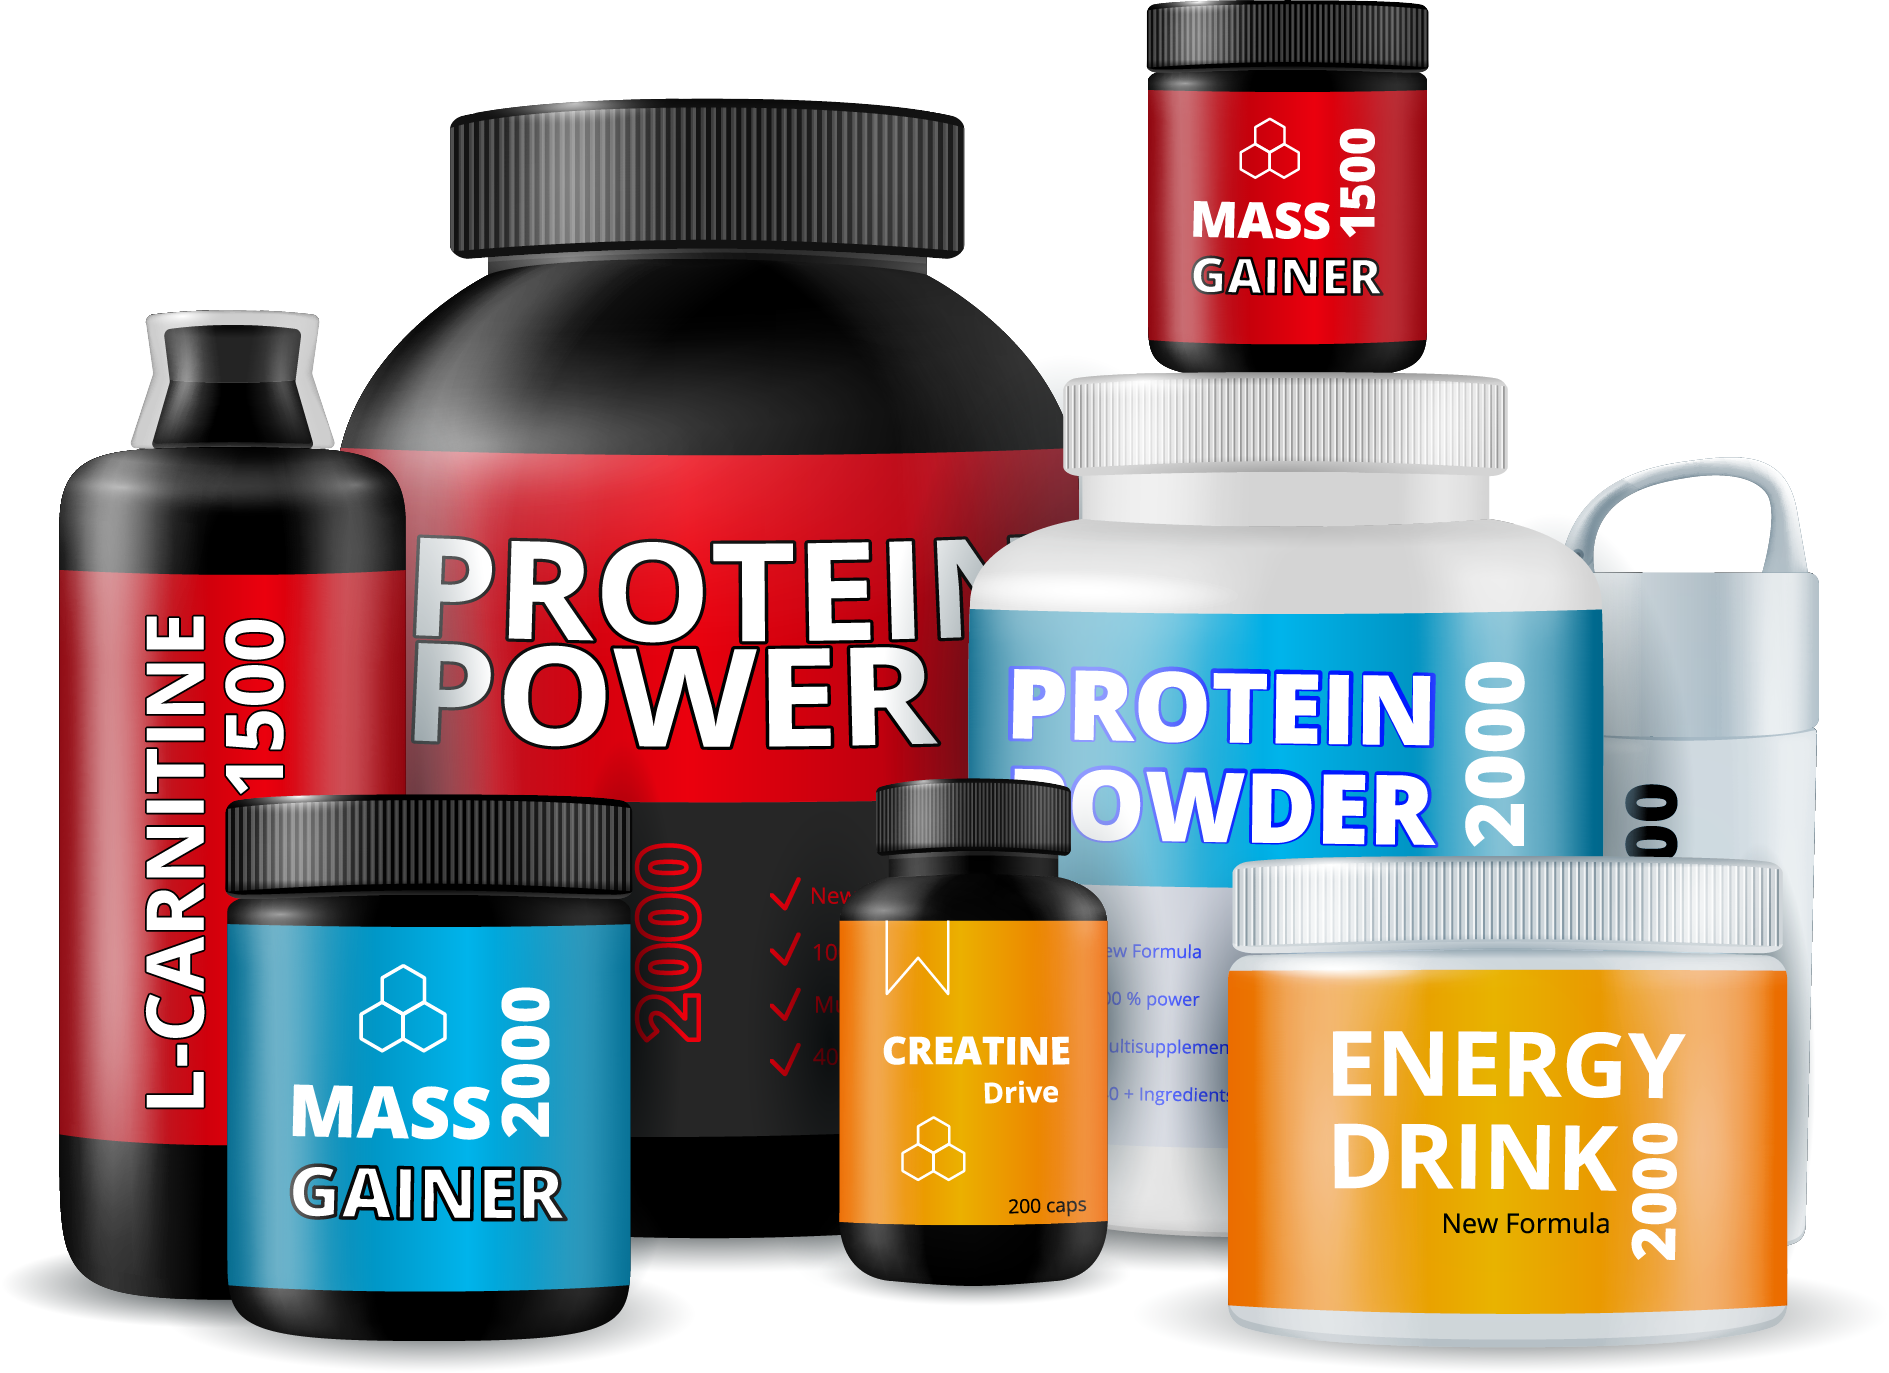 Third party gym supplements